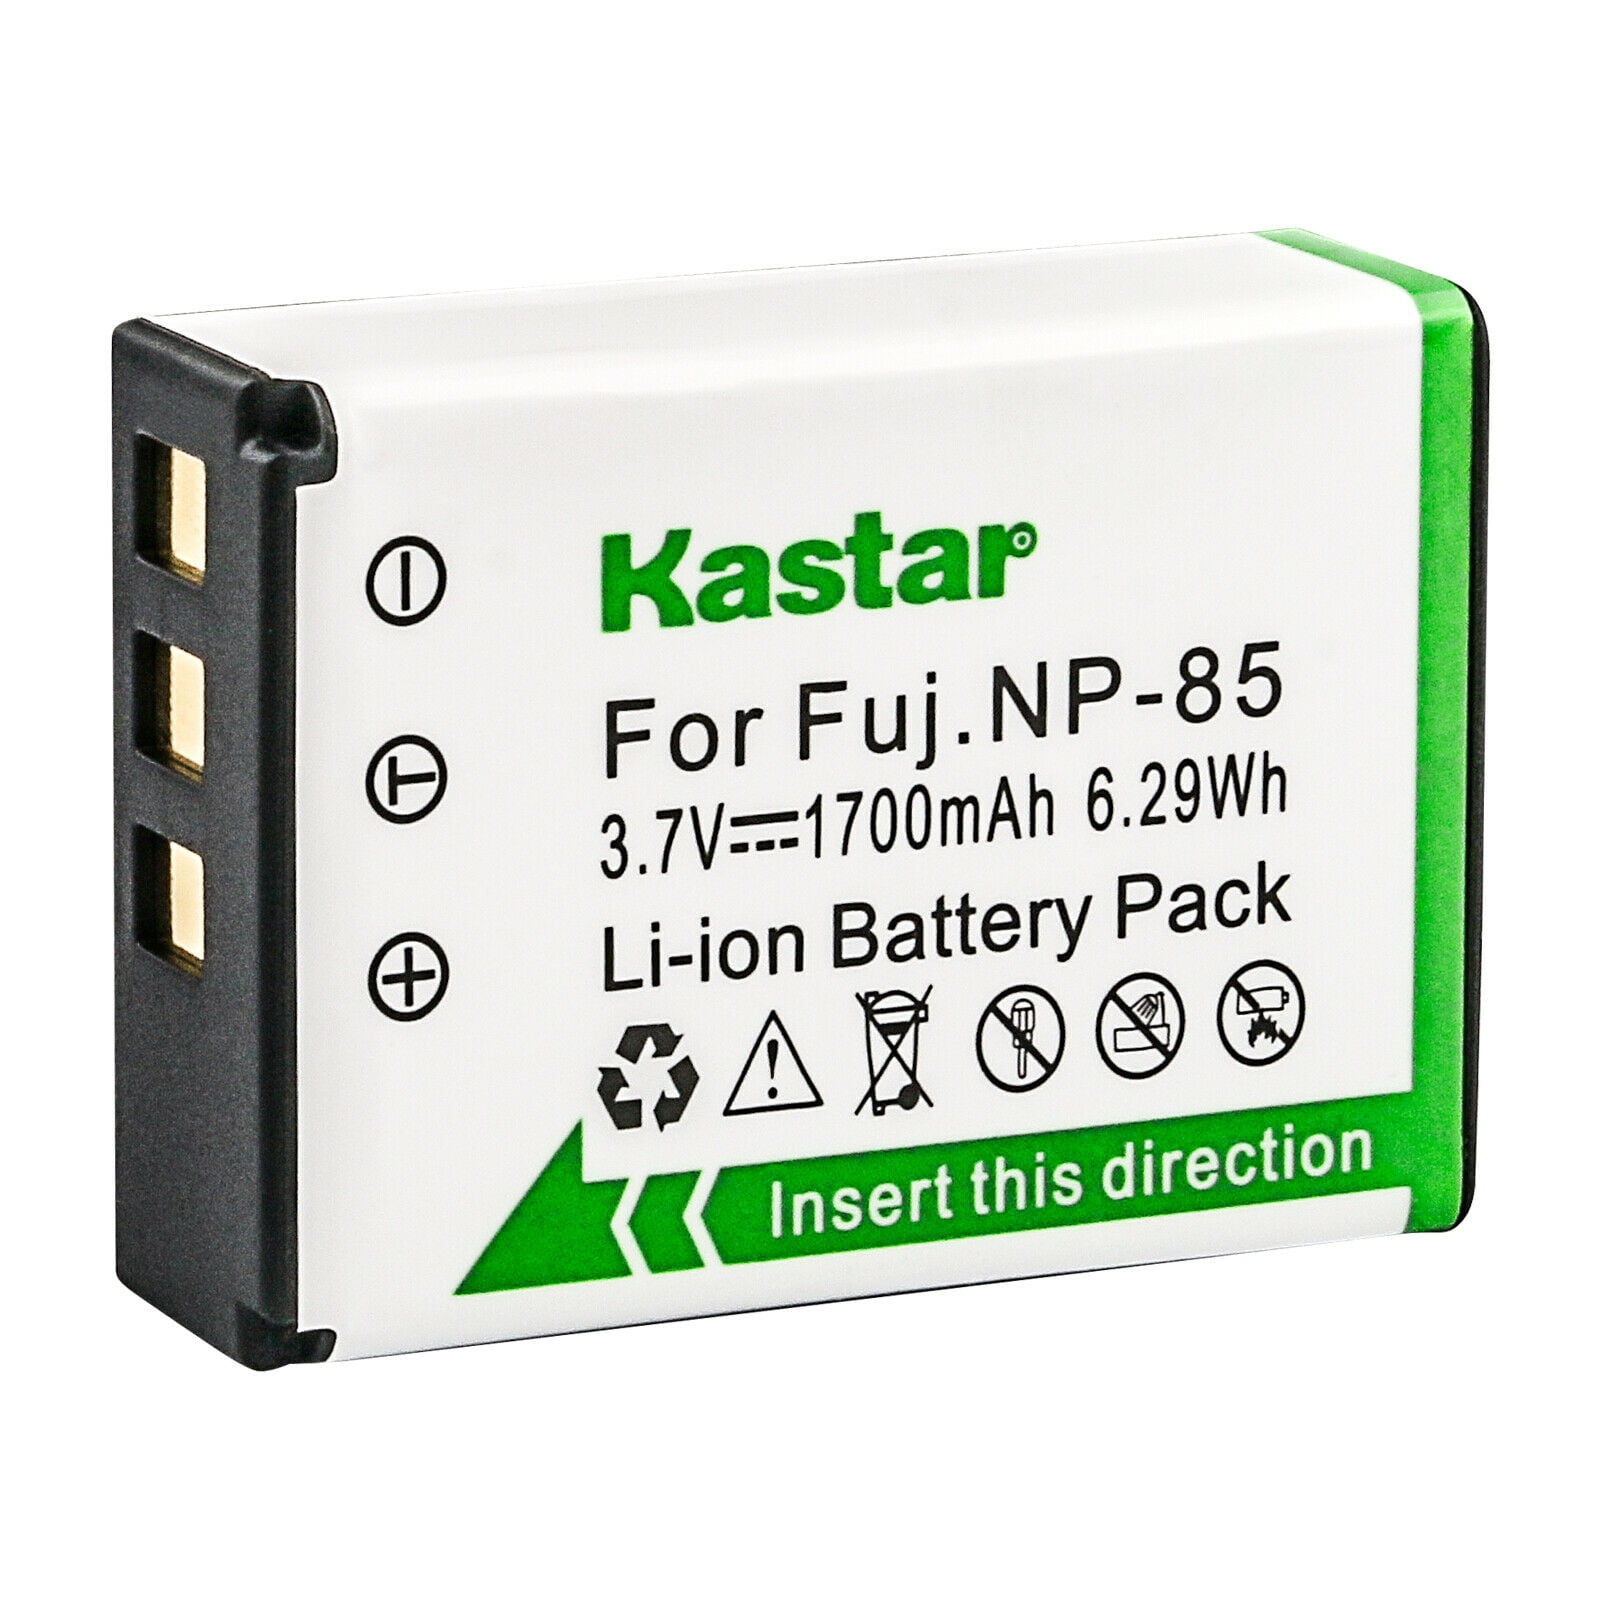 Kastar 1-Pack Battery and AC Wall Charger Replacement for Toshiba Camileo X200 Camileo X400 Camileo X416 Camileo X416 HD Camileo Z100 Medion Life P47011 Life X47023 MD86423 MD 86423 MD86695 MD 86695 